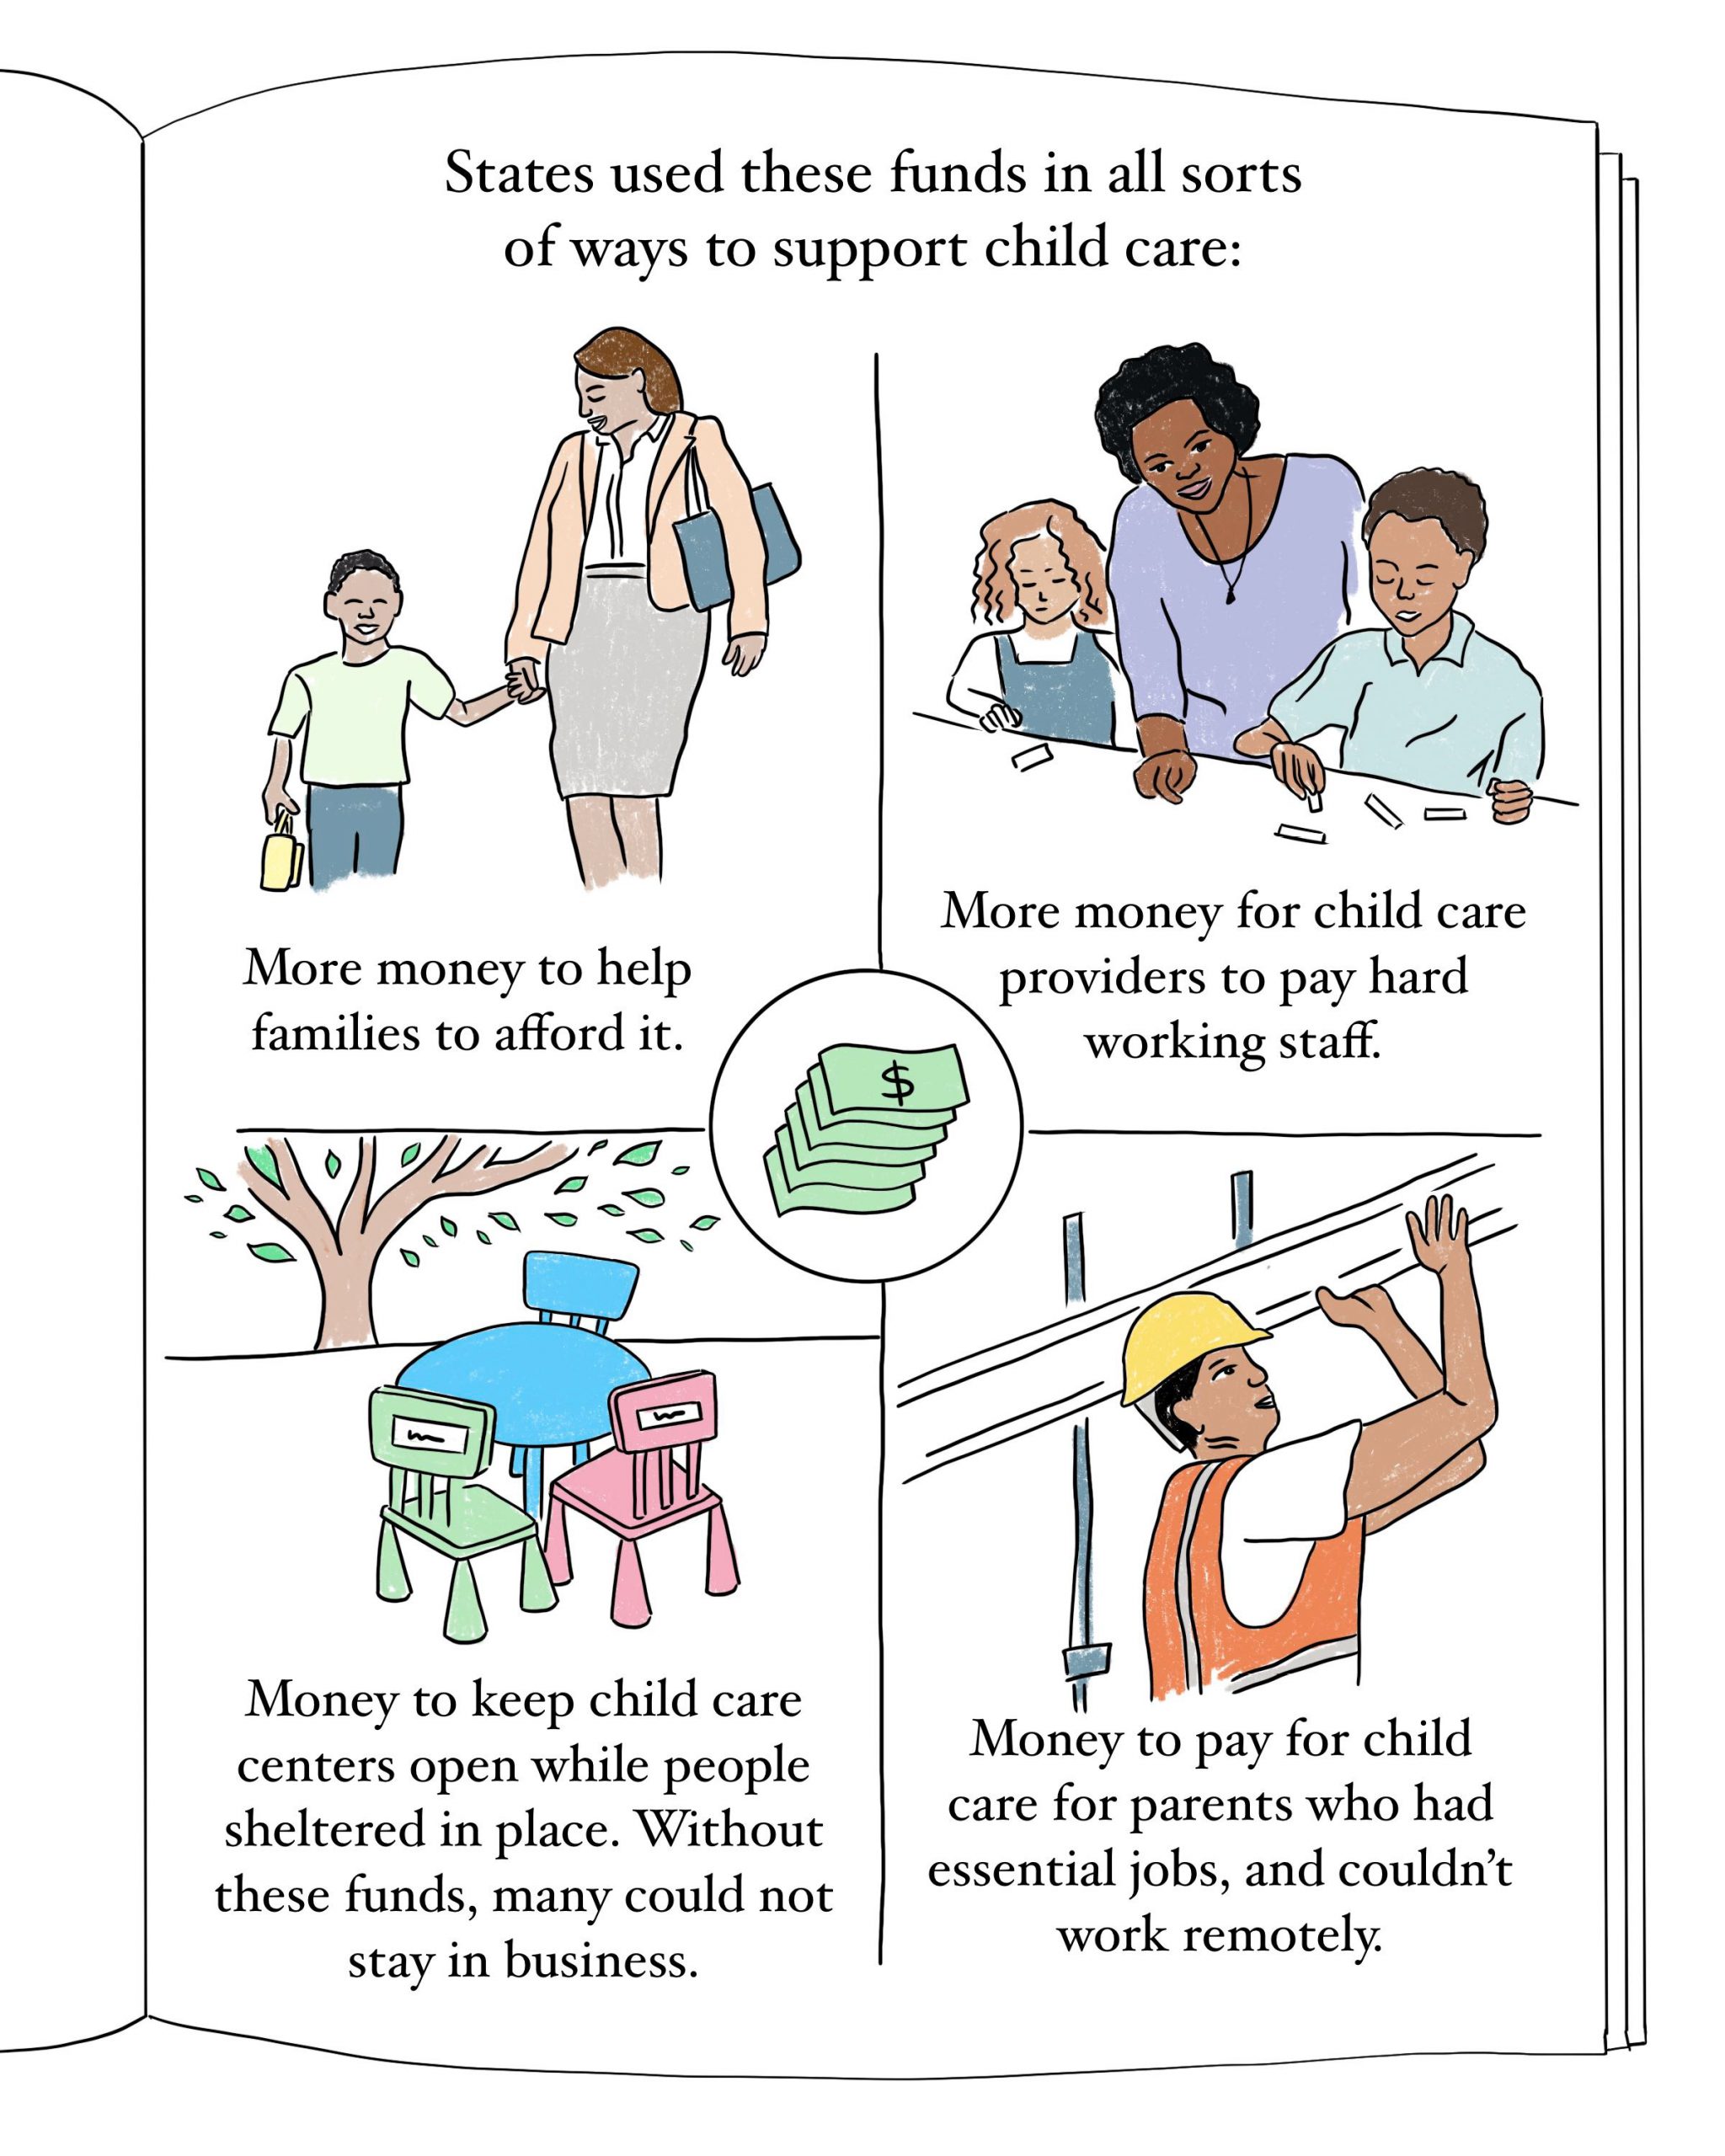 Pictures of ways that states supported child care- showing a mother with child, a teacher working with children, tables and chairs for young children in a center, and a construction worker in an essential job. The text reads:

States used these funds in all sorts of ways to support child care:
More money to help families to afford it.
More money for child care providers to pay hard working staff.
Money to keep child care centers open while people sheltered in place. Without these funds, many could not stay in business.
Money to pay for child care for parents who had essential jobs, and couldn't work remotely.
